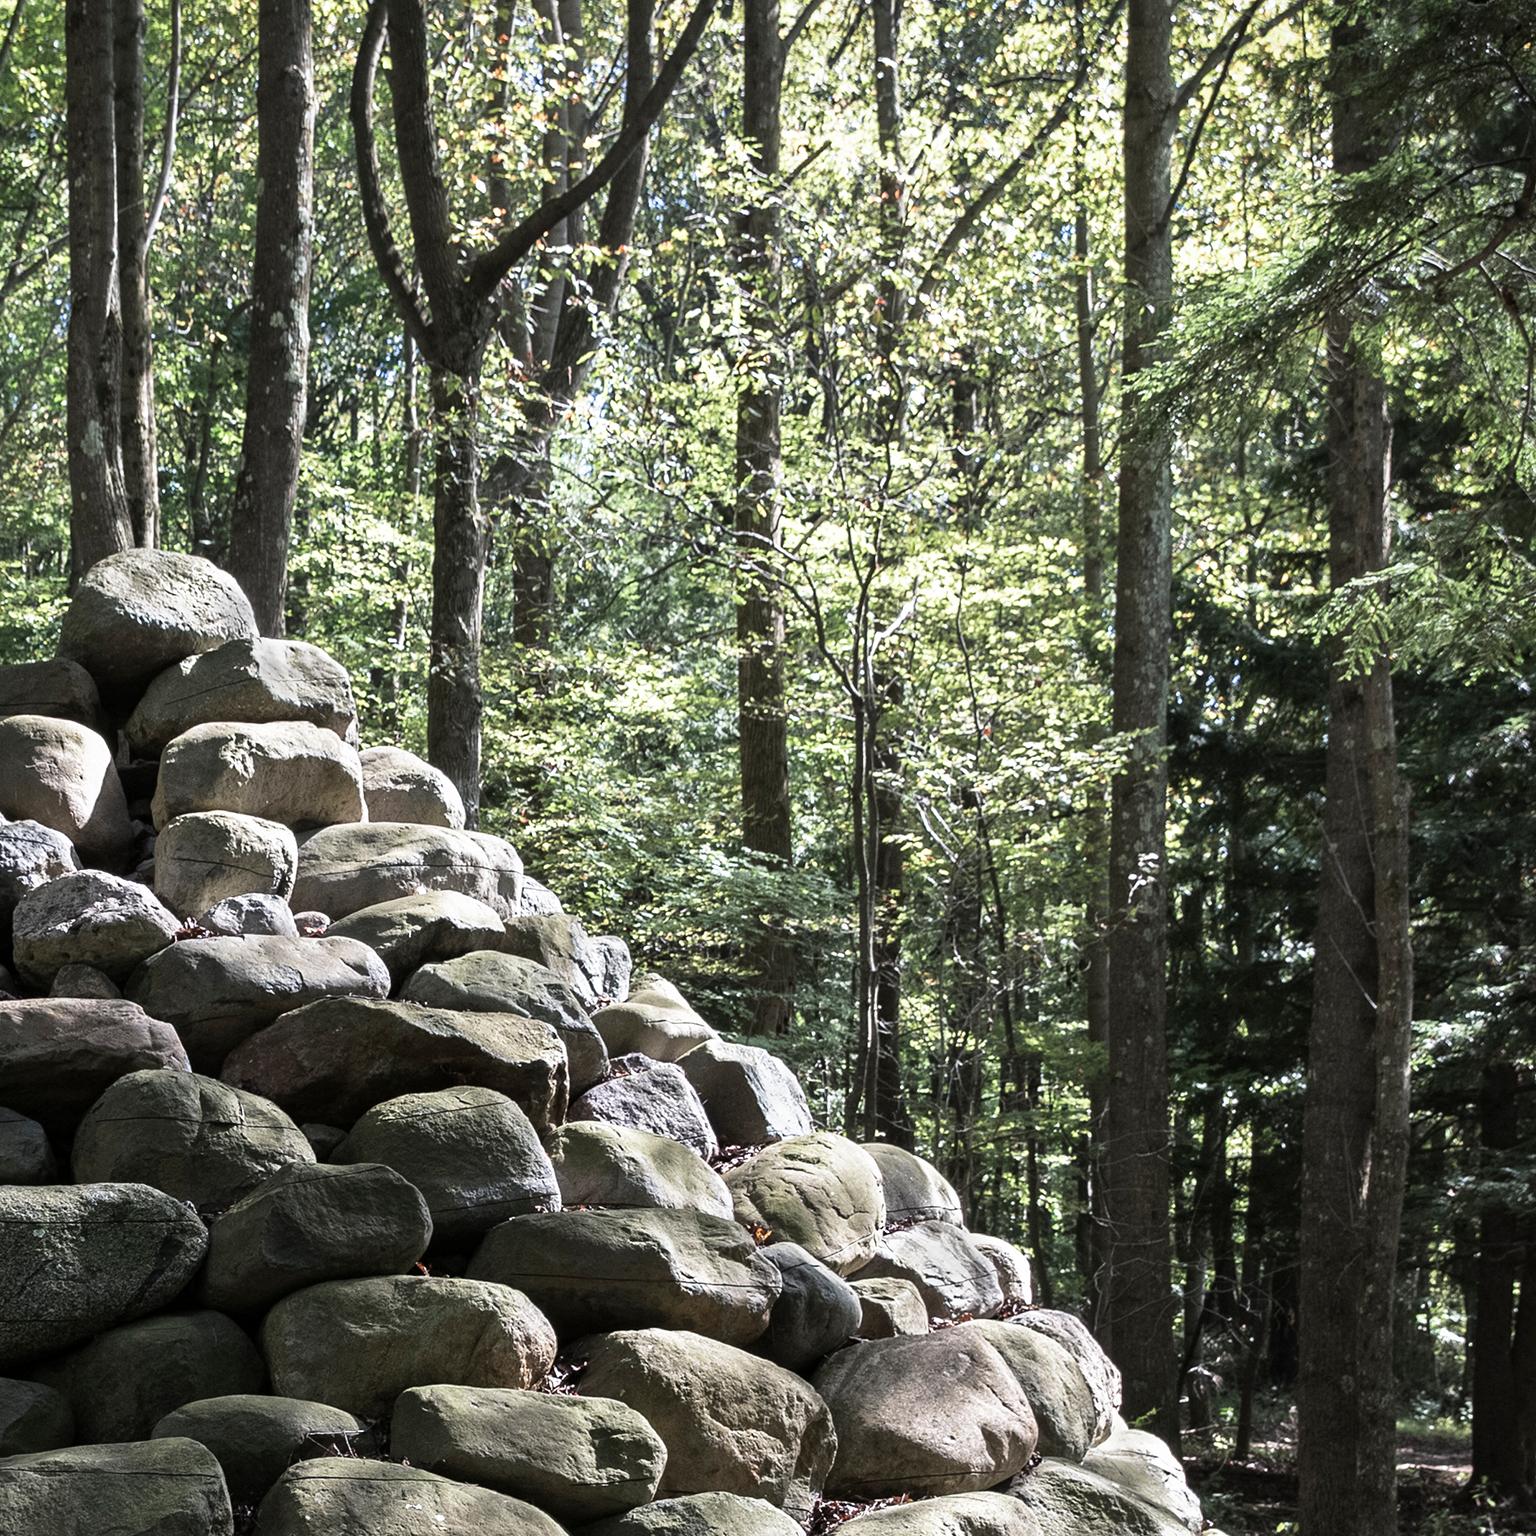 Stone Cairn Sculpture in Forest,  USA, 2016
Photograph by Cosmo Condina. A stone cairn sculpture in the woods, Kentuck Knob, Pennsylvania, USA, 2016
Archival pigment print 19 X 12.6 in. Edition of 10. This is # 3/10 in the edition.

A colour